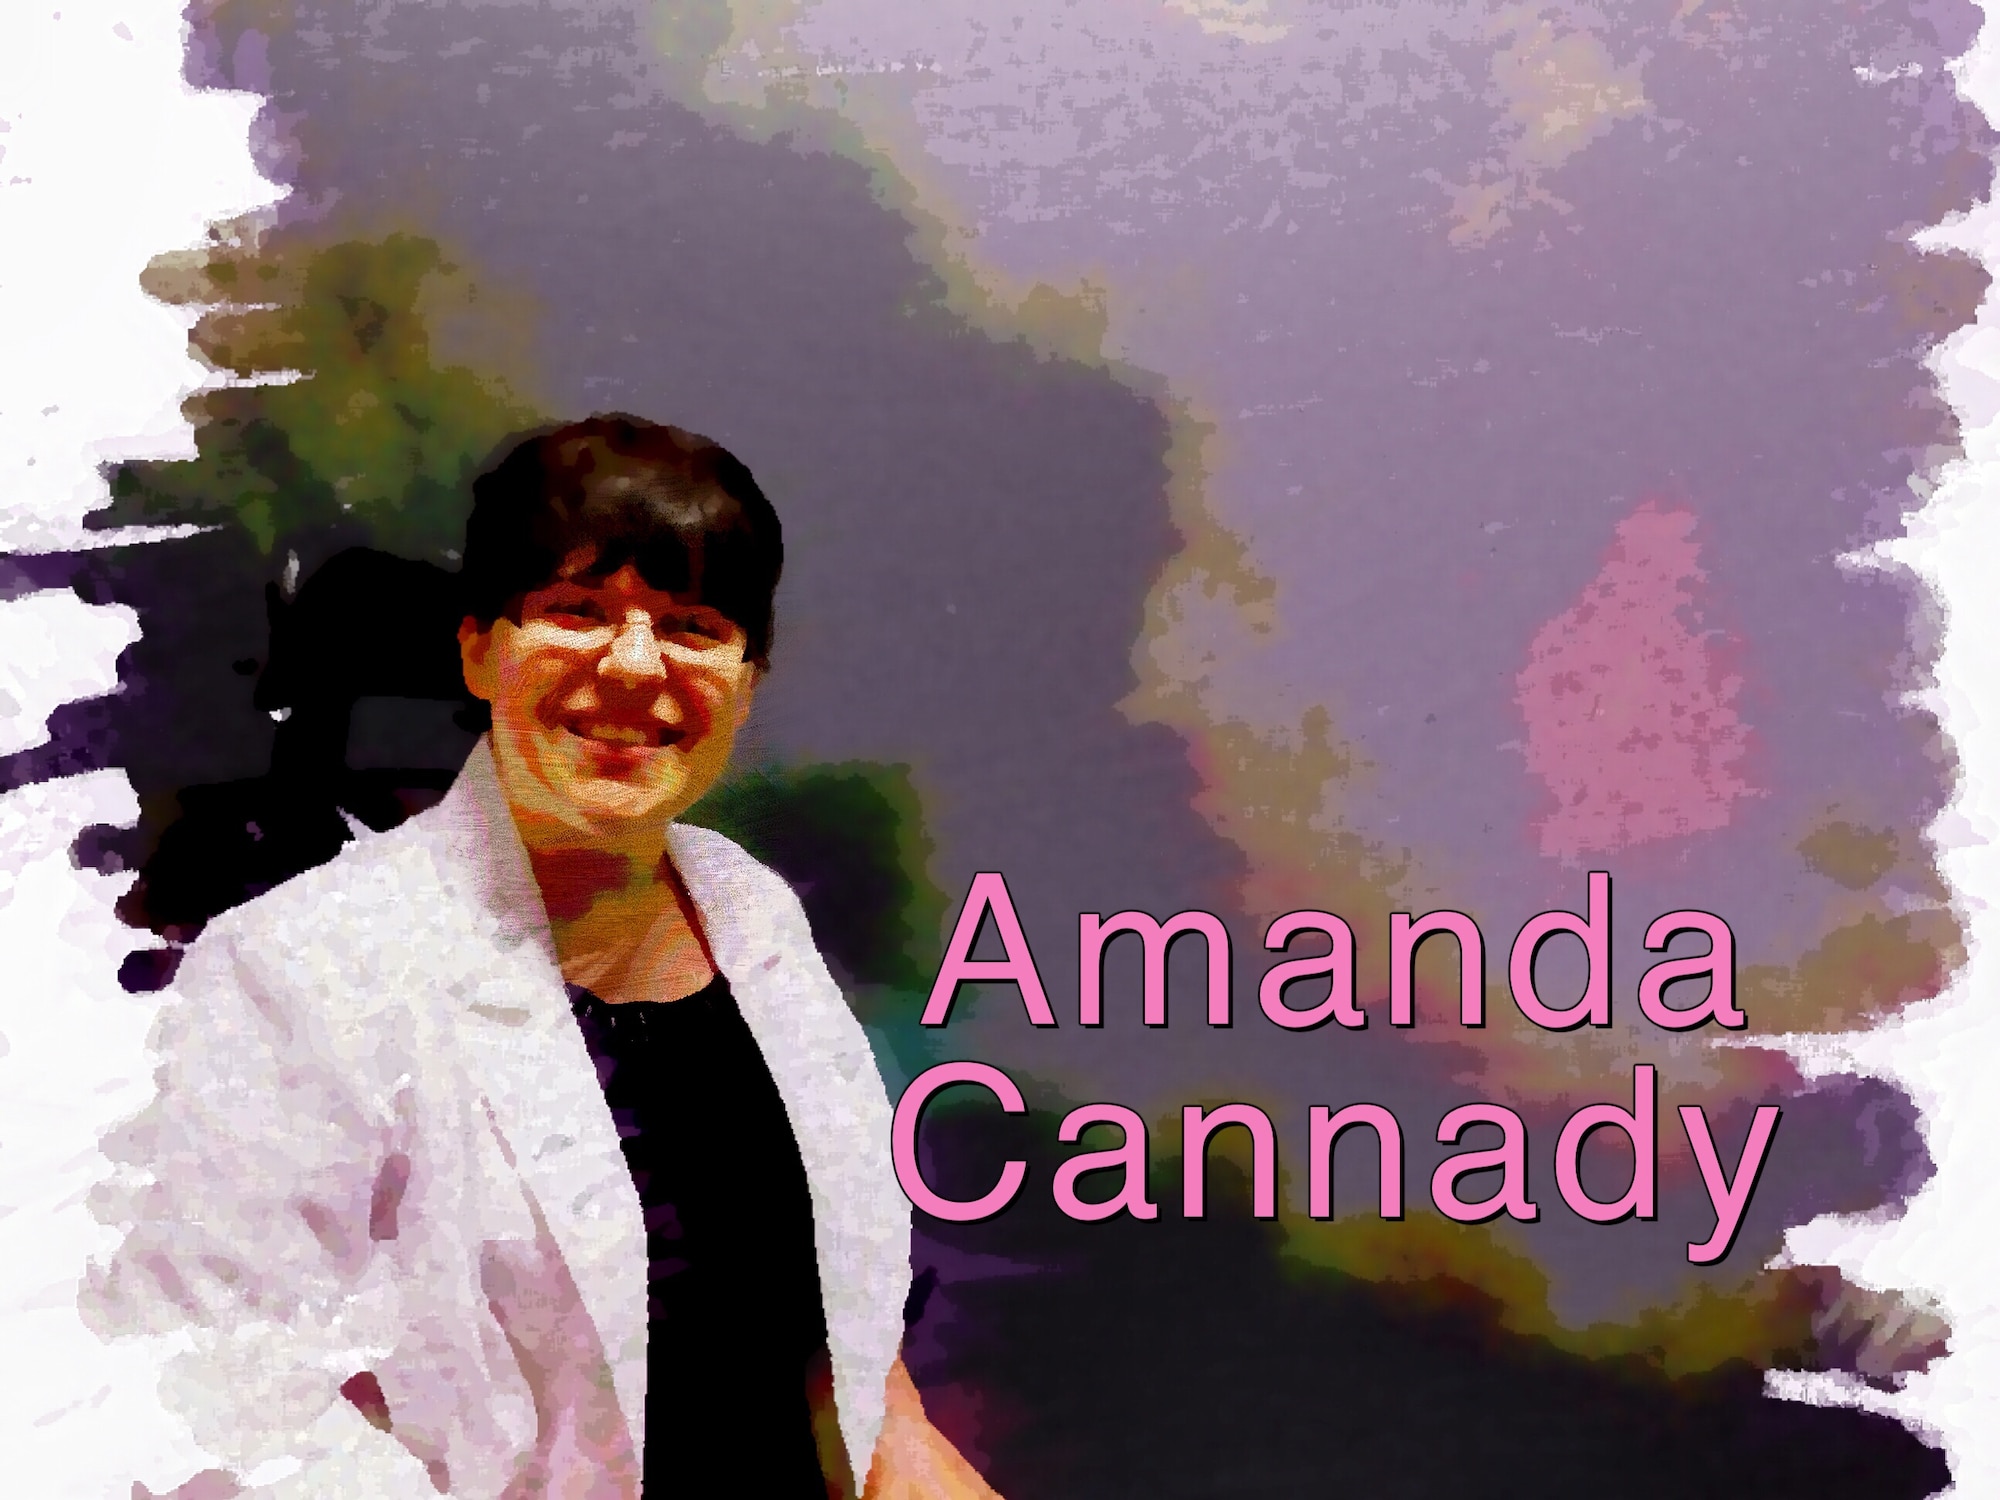 Getting to know you: Amanda Cannady (U.S. Air Force Illustration by Claude Lazzara)